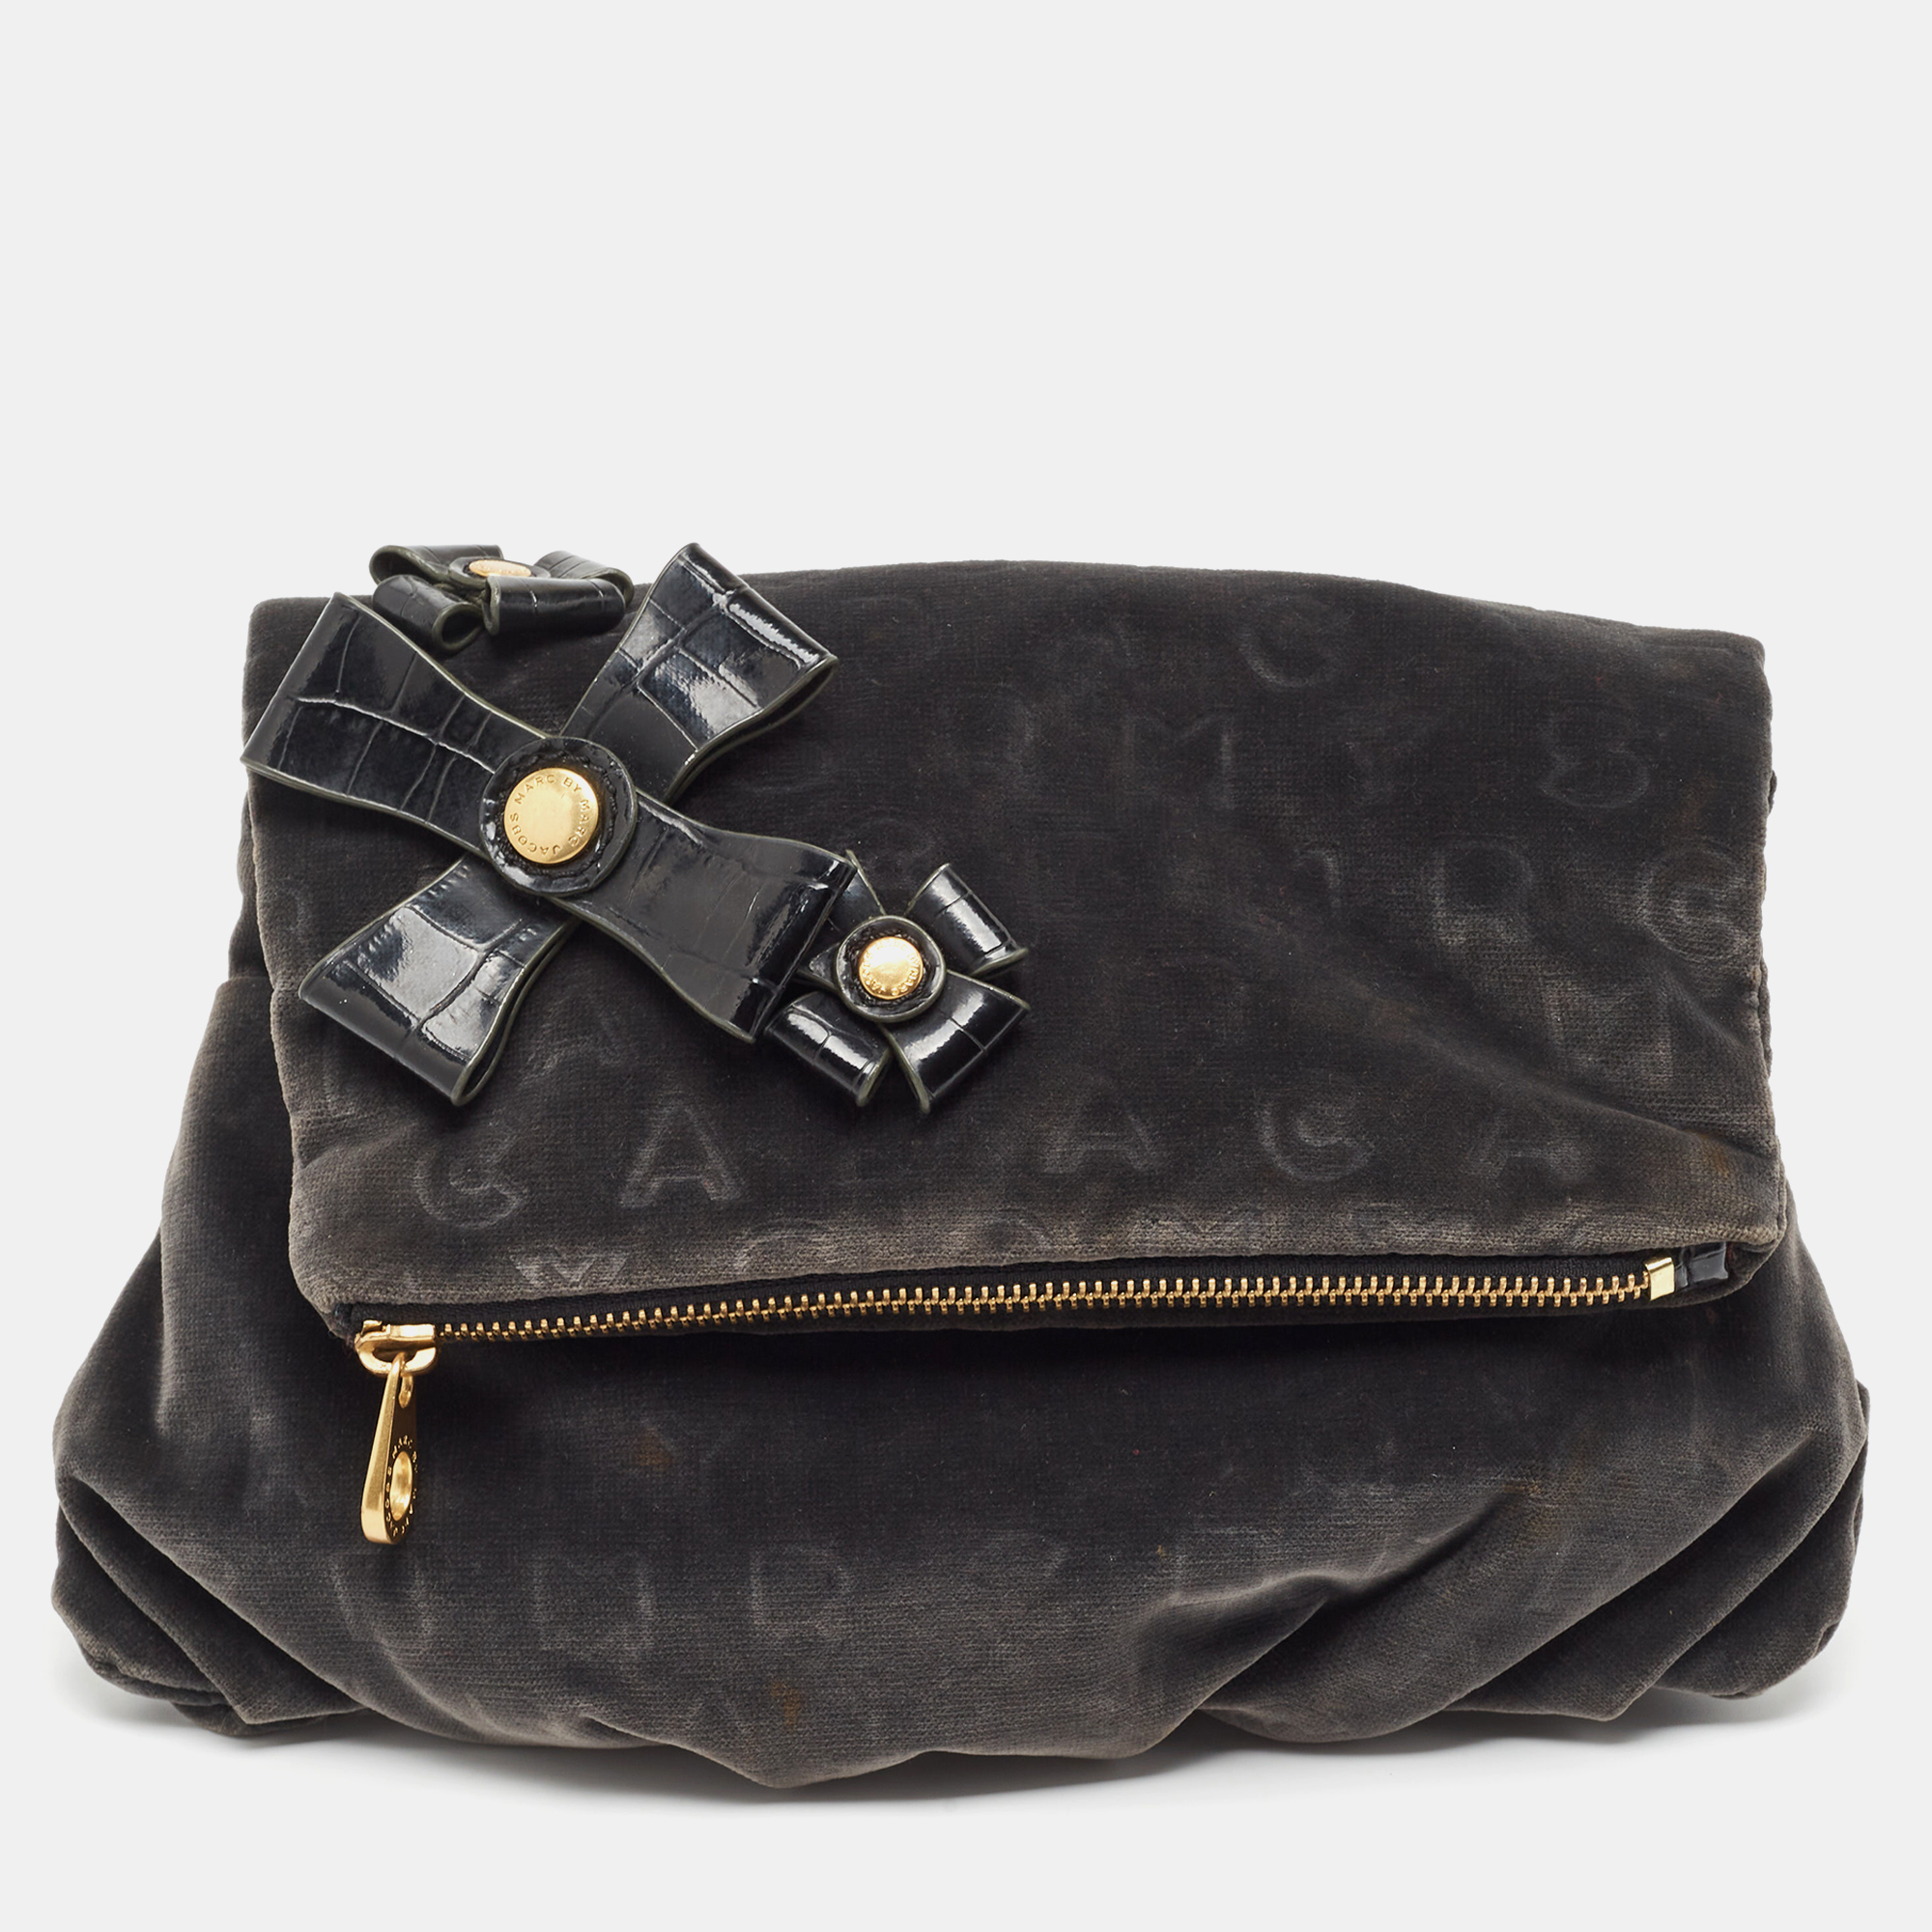 

Marc by Marc Jacobs Grey/Black Velvet and Croc Embossed Leather Bow Fold Over Clutch